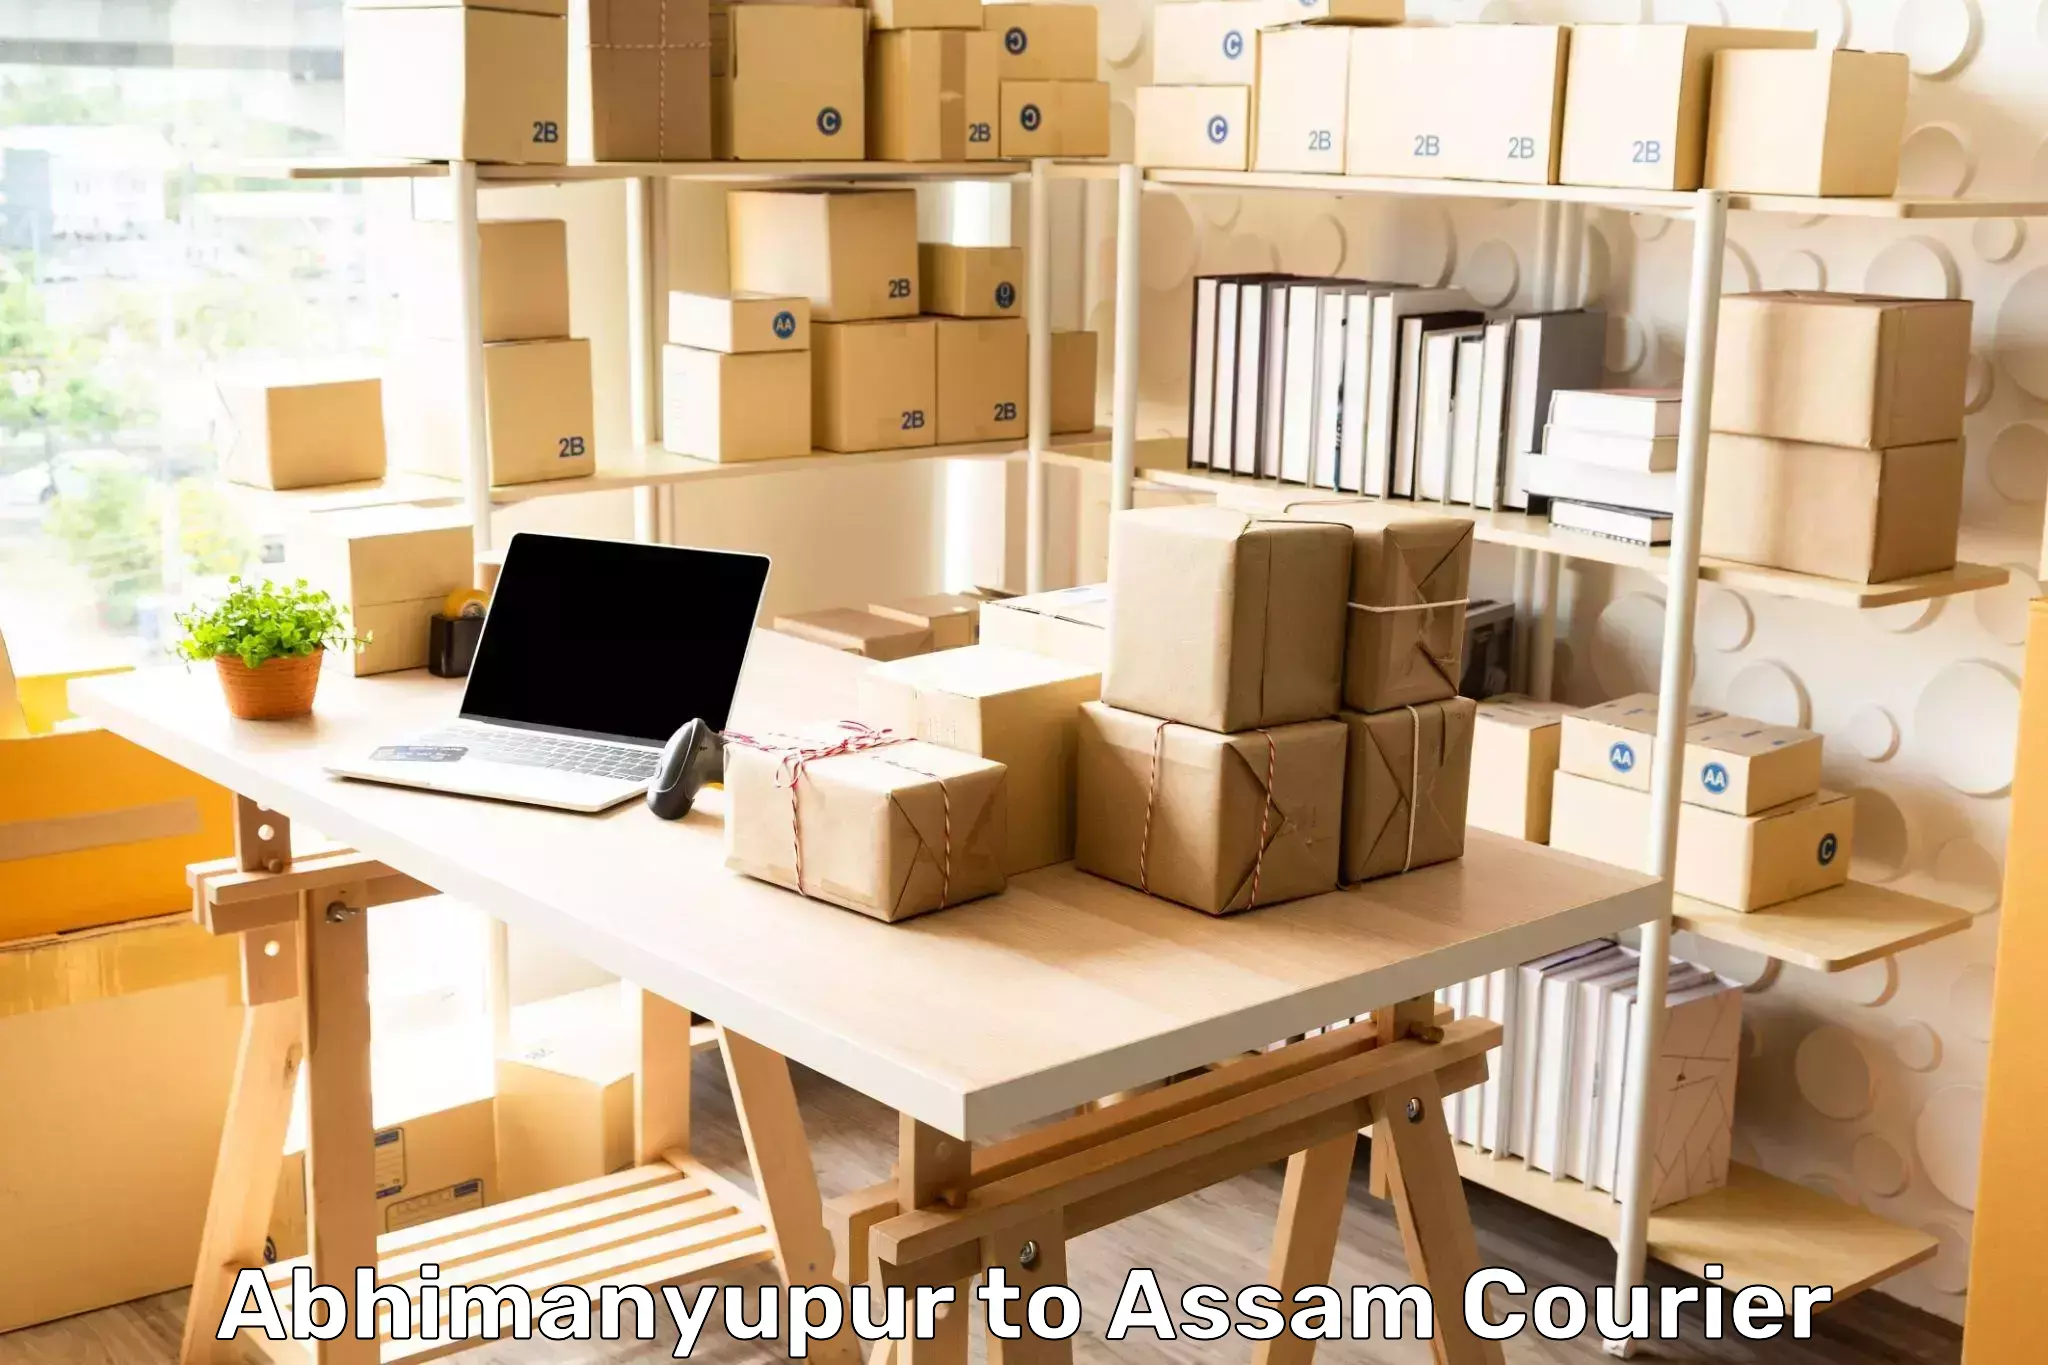 International courier networks Abhimanyupur to Assam